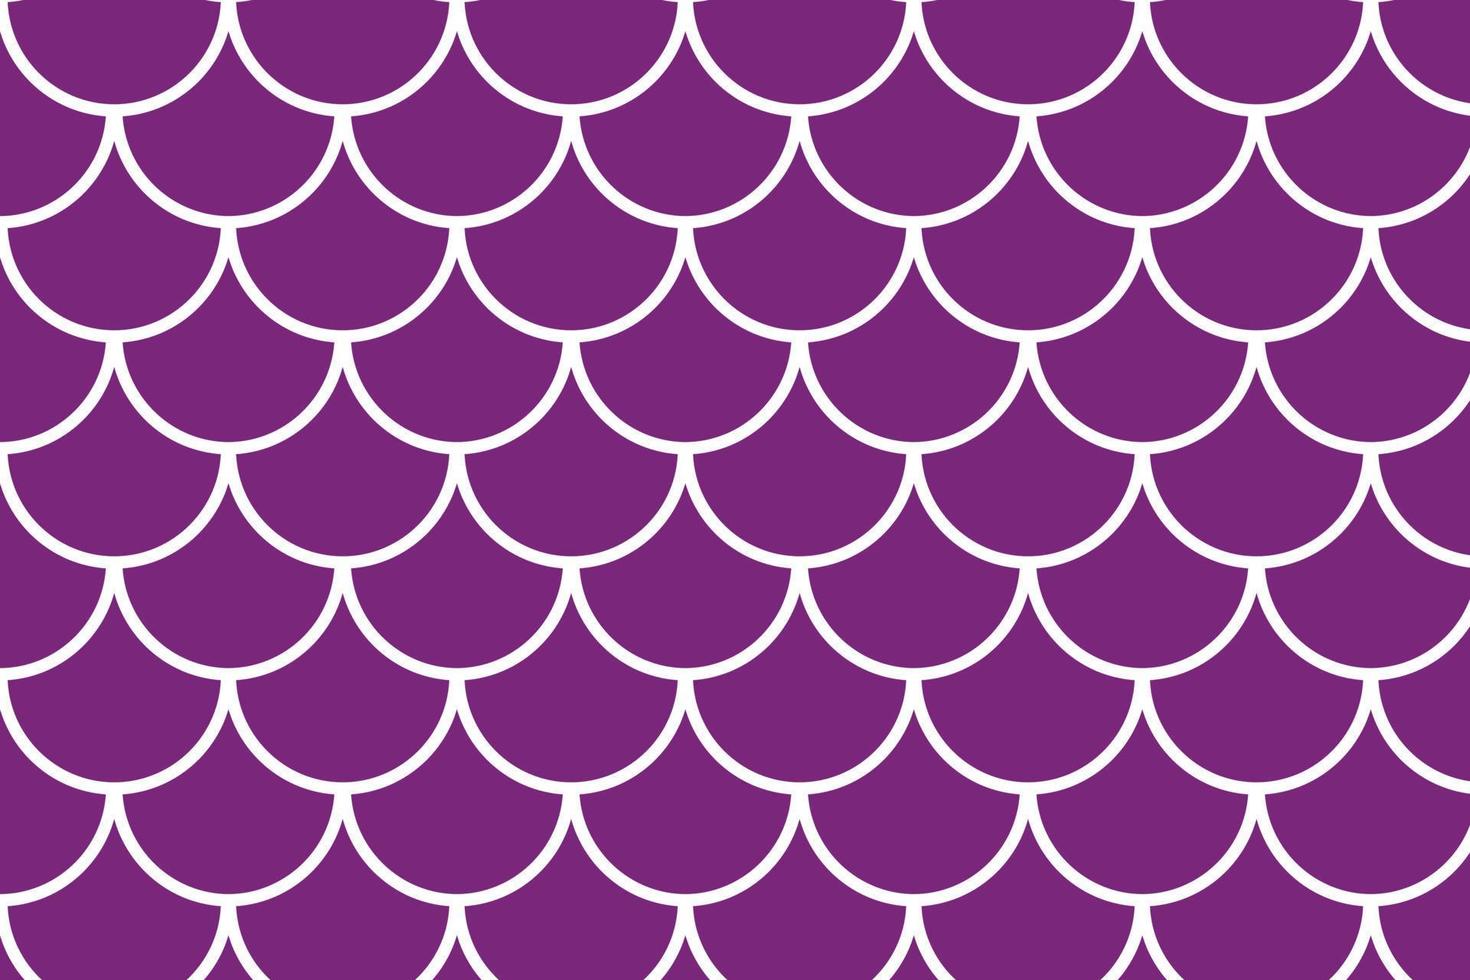 abstract white mermaid scale on purple background pattern design. vector